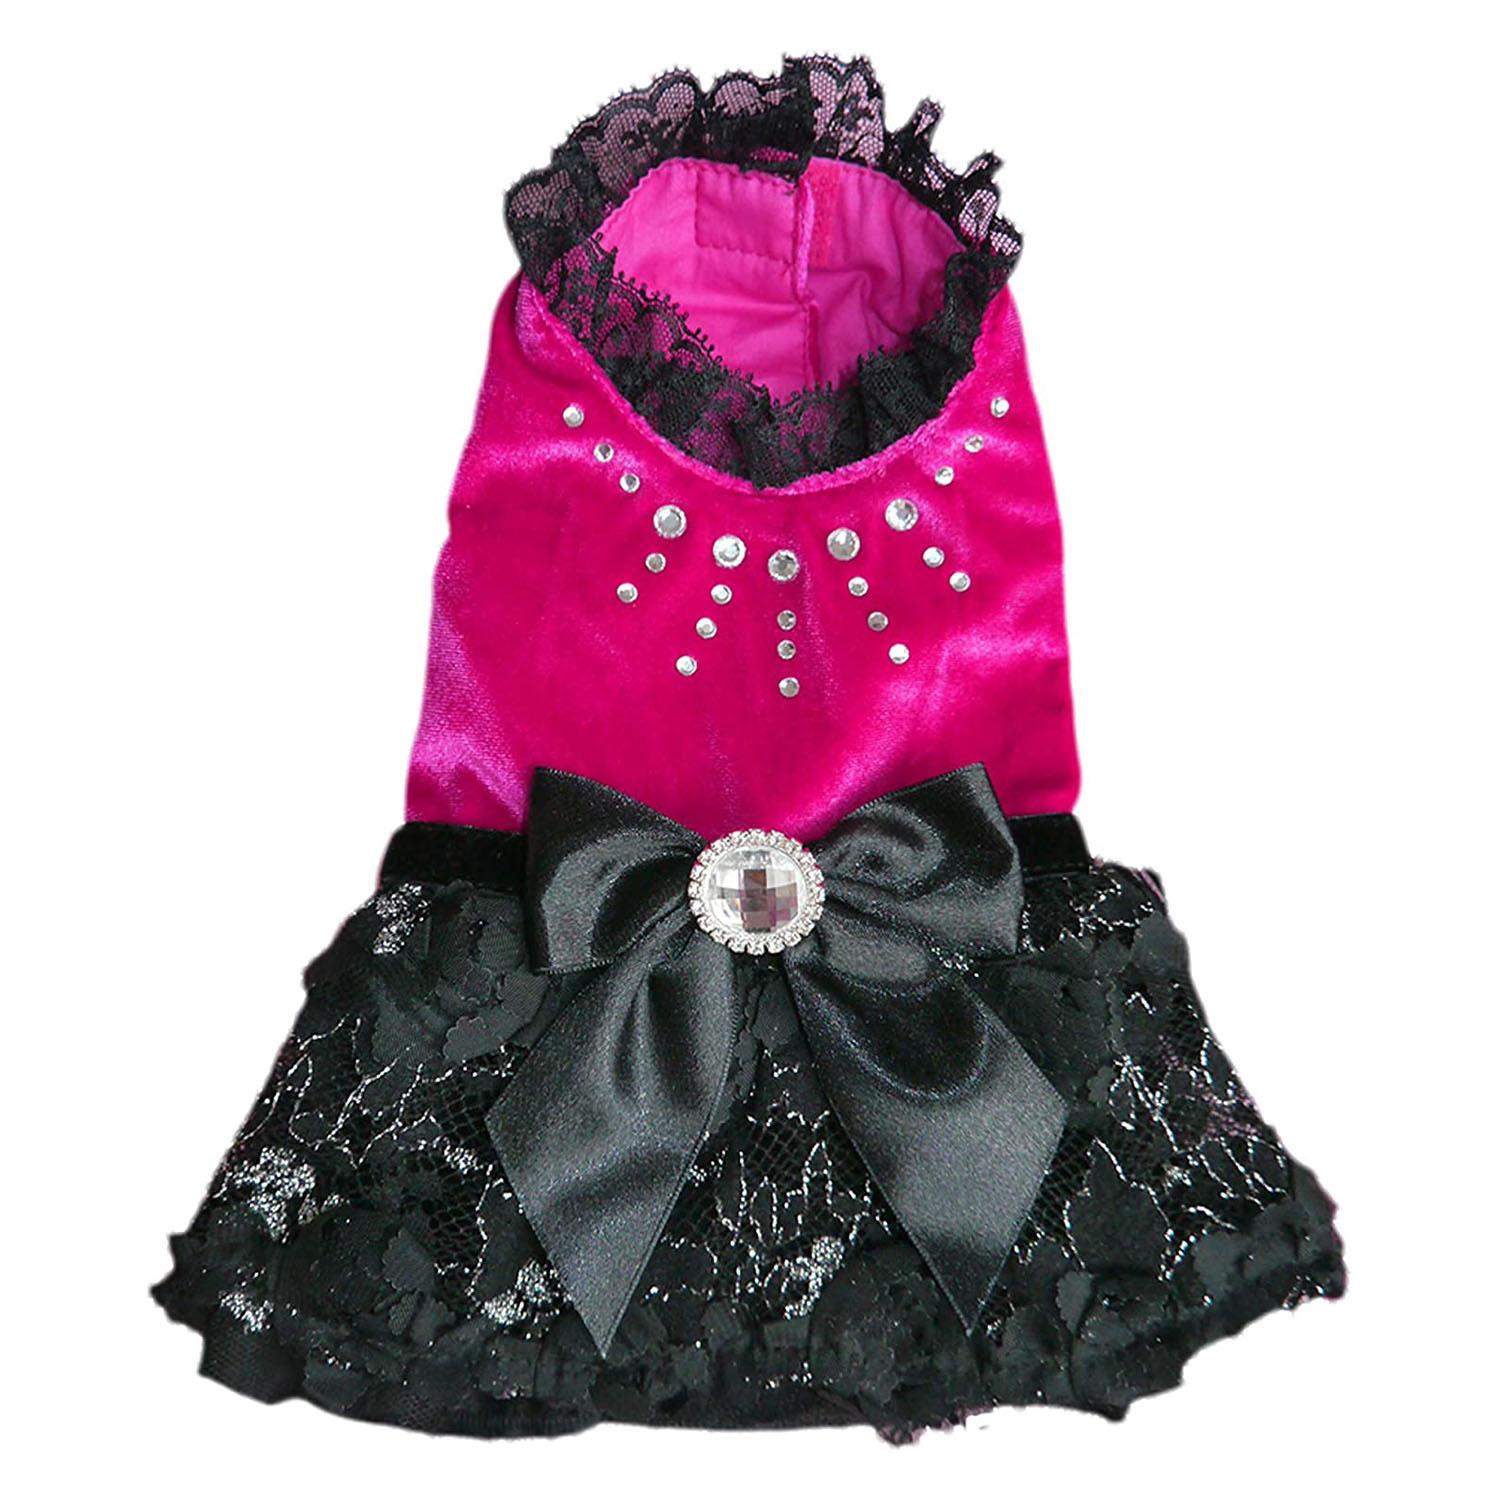 Pooch Outfitters Paris Party Dog Dress - Pink